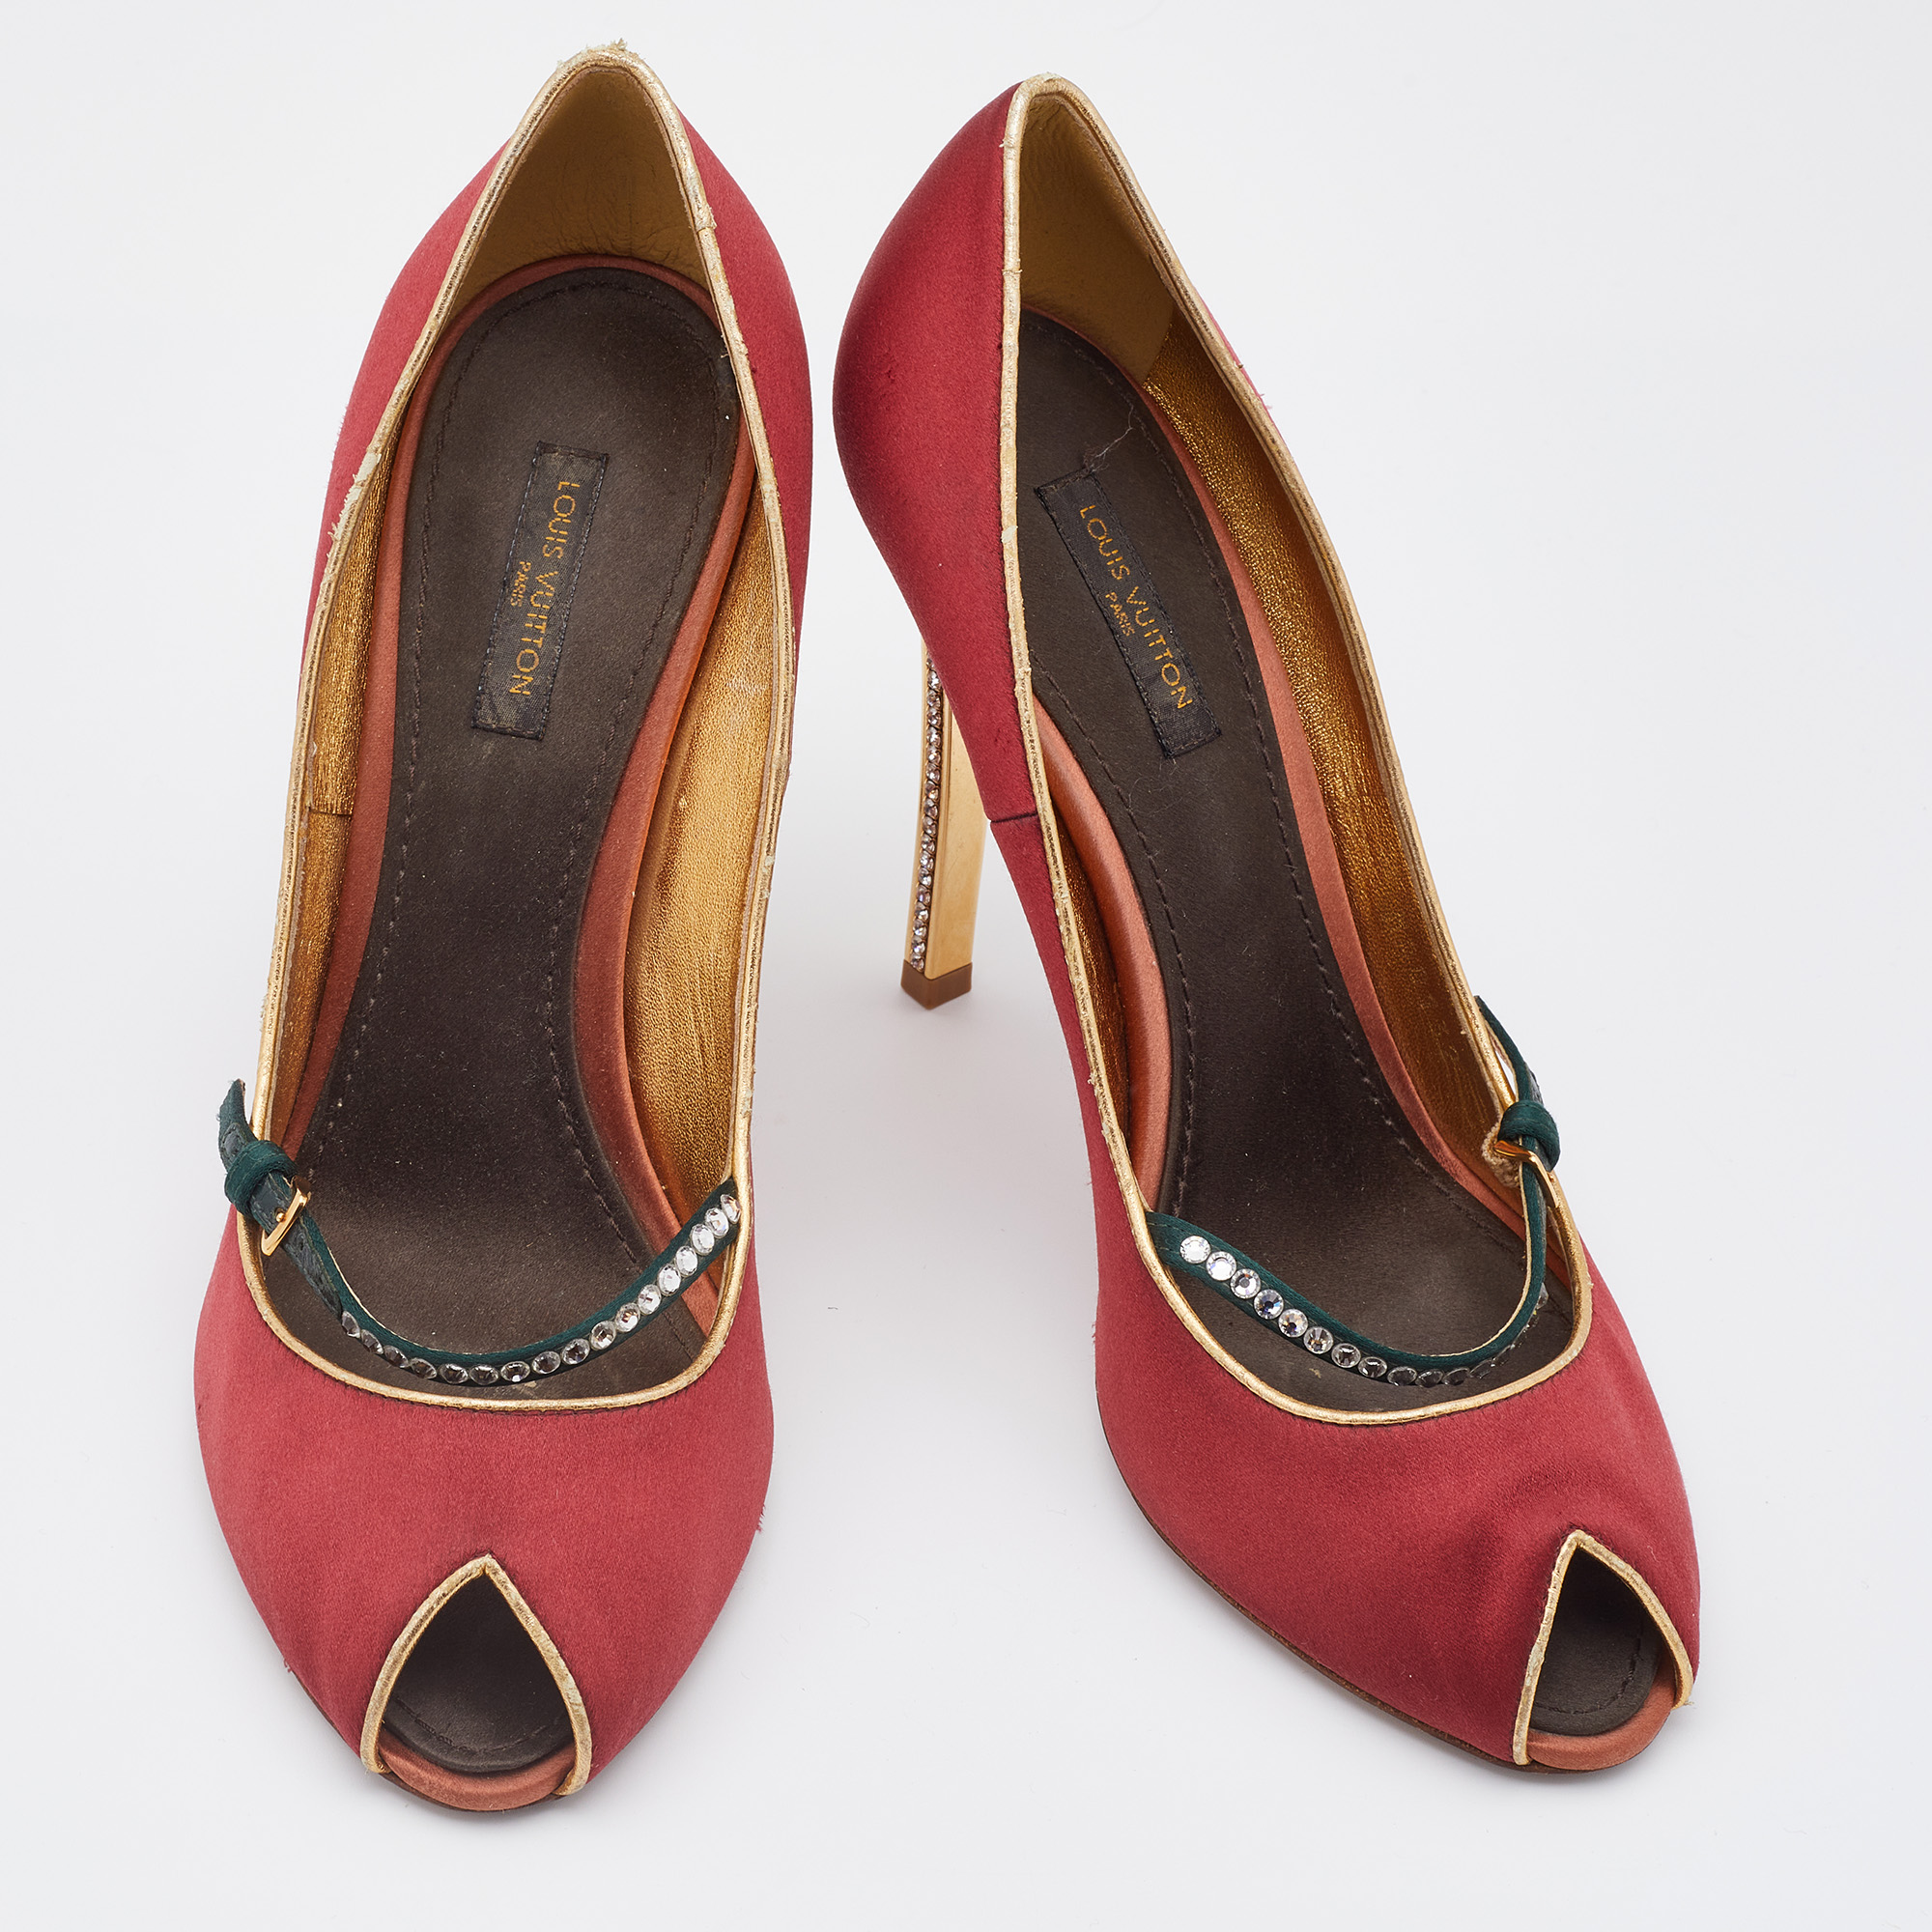 Louis Vuitton Red Satin Crystal Embellished Mary Jane Peep Toe Pumps Size 38.5